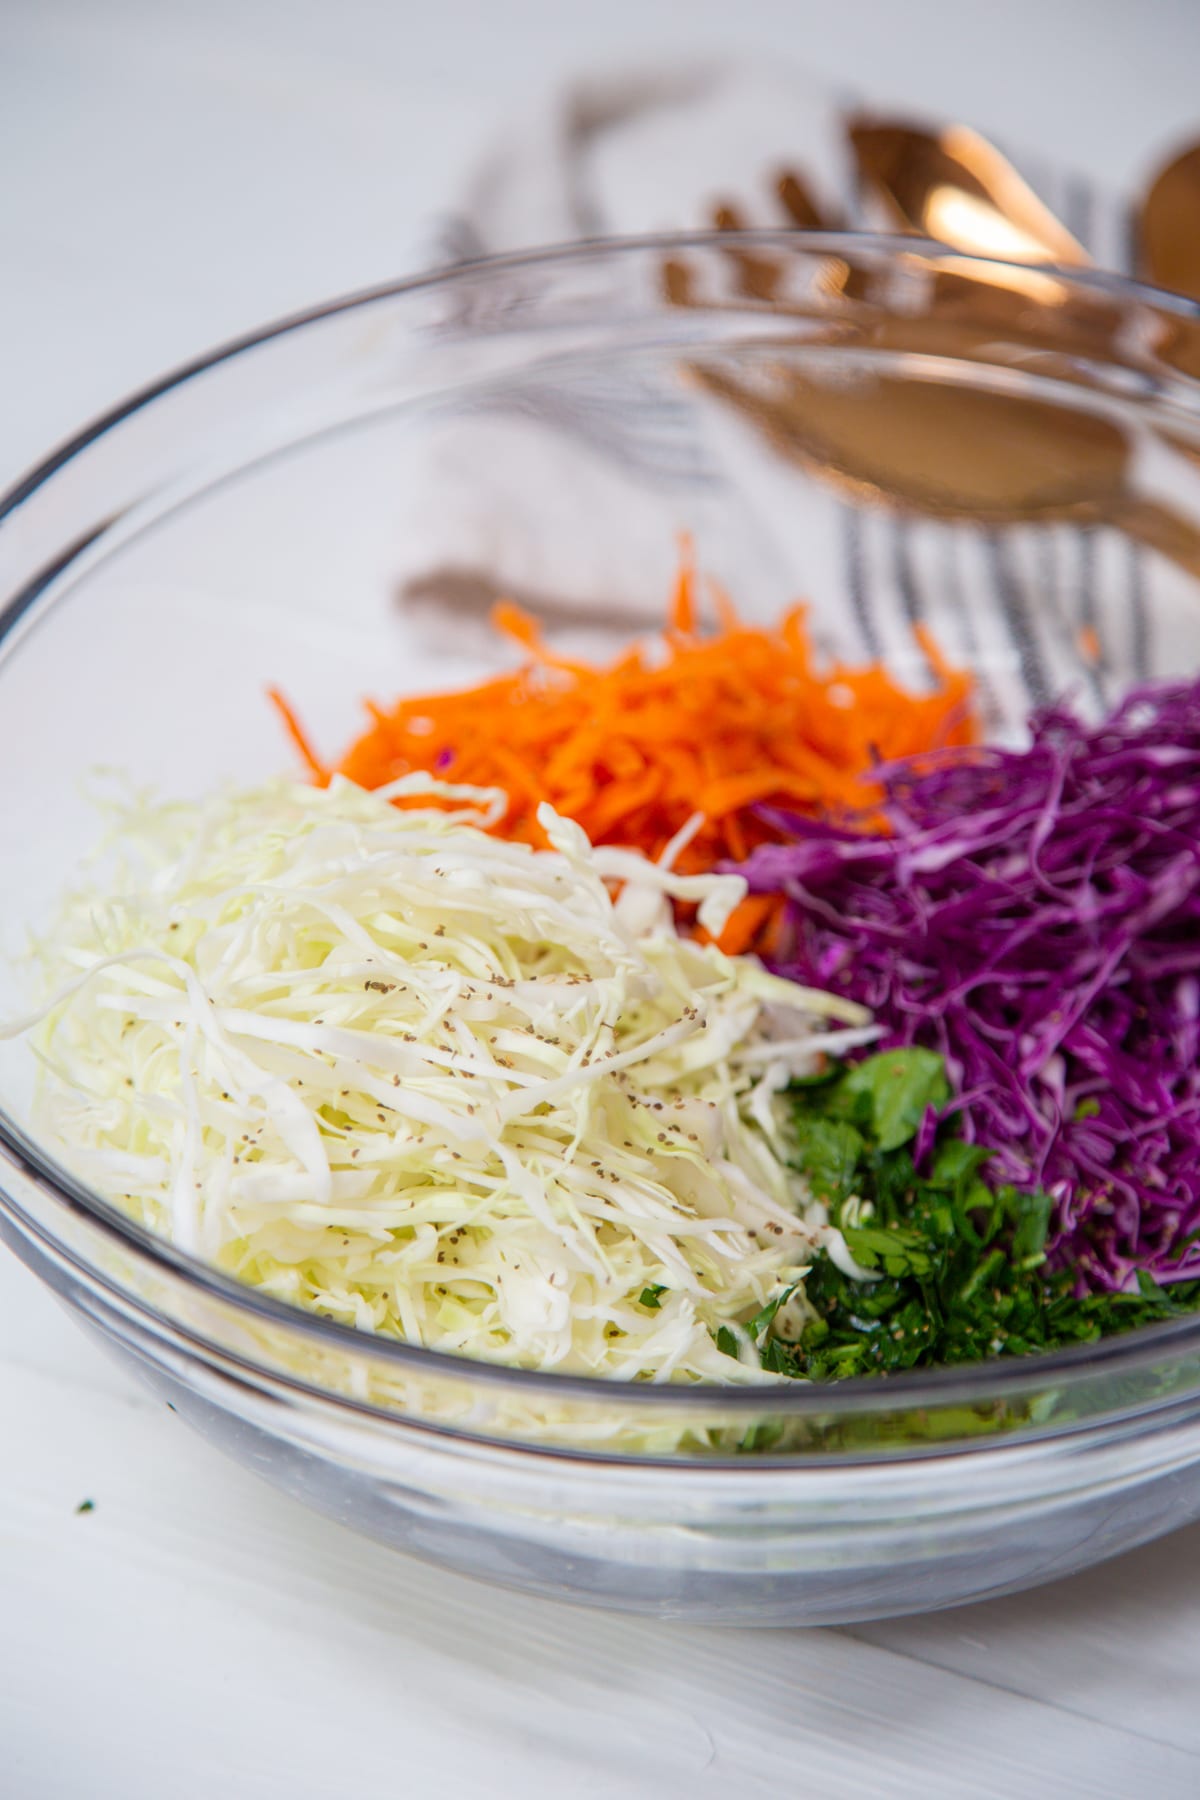 A clear glass bowl filled with shredded green and red cabbage, grated orange carrots, and chopped parsley.